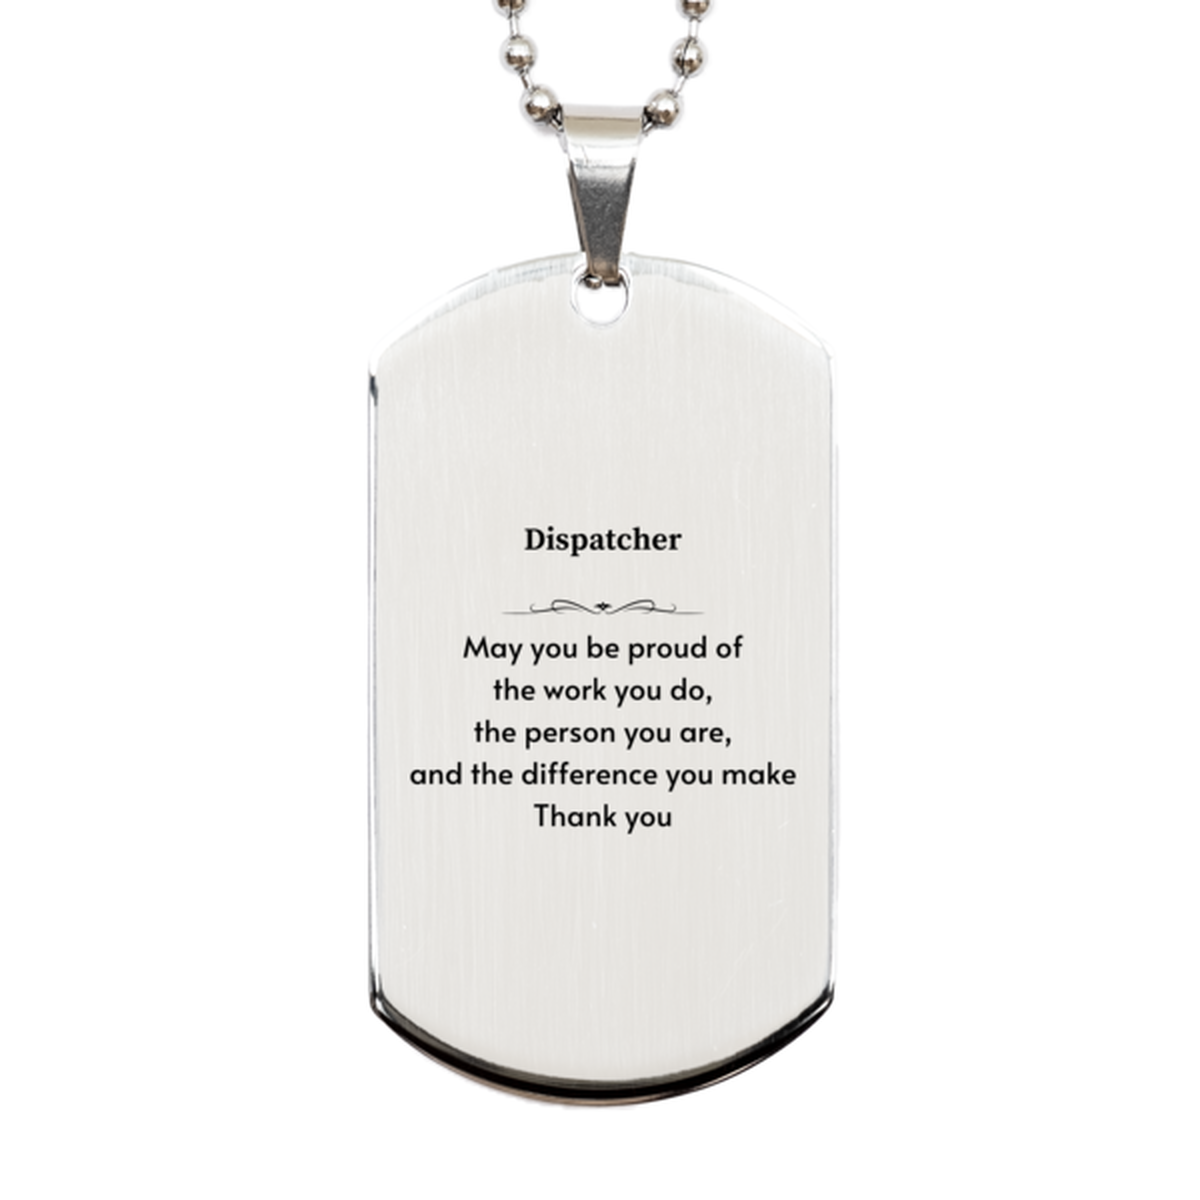 Heartwarming Silver Dog Tag Retirement Coworkers Gifts for Dispatcher, Dispatcher May You be proud of the work you do, the person you are Gifts for Boss Men Women Friends